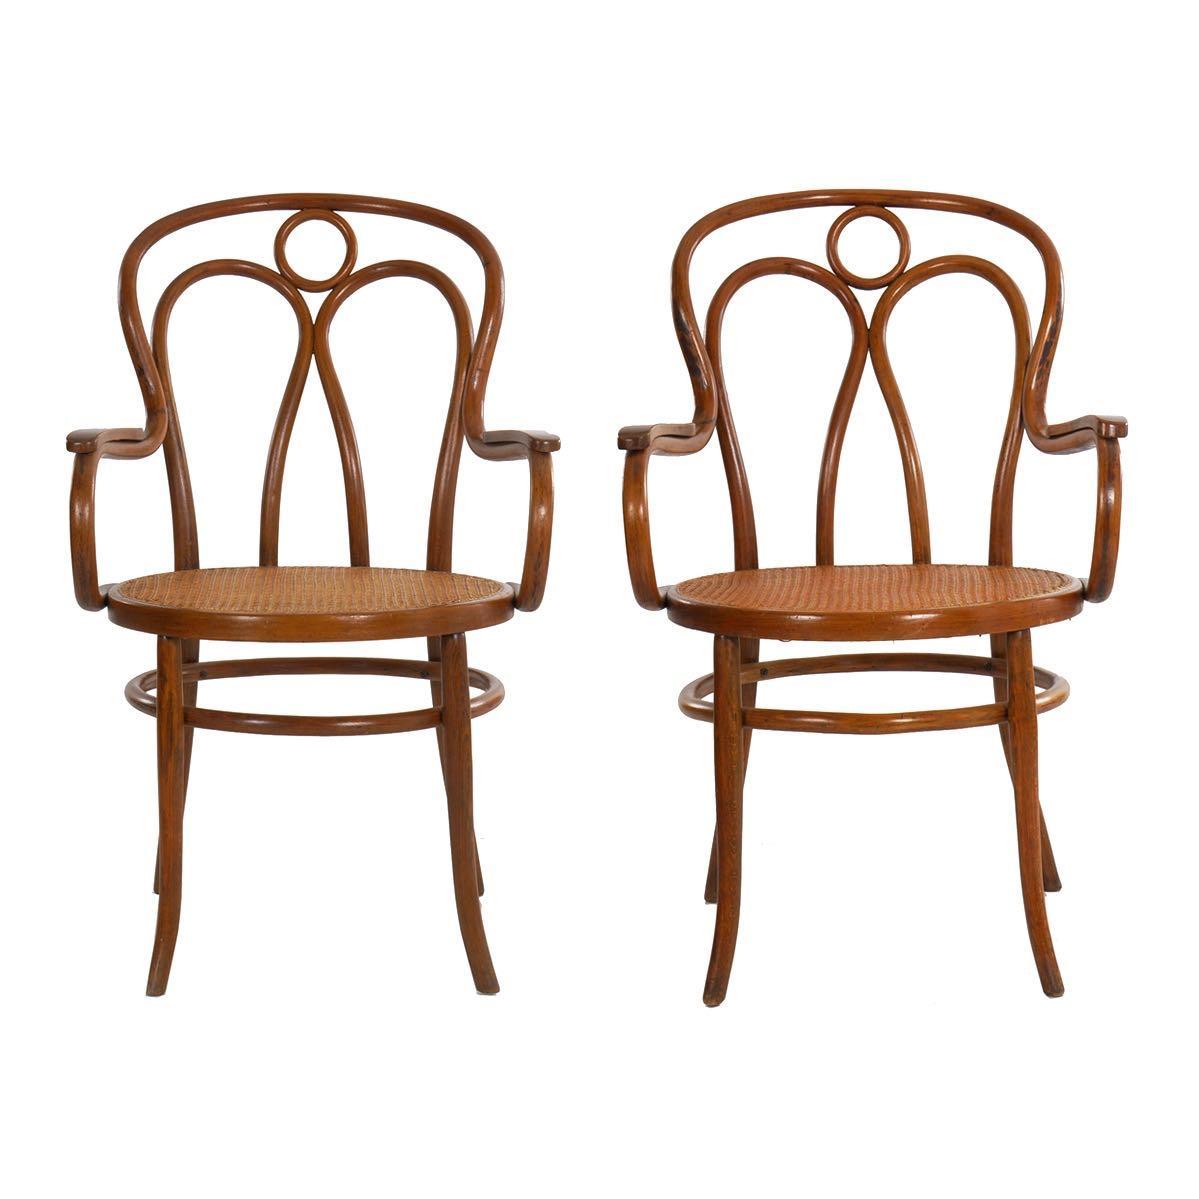 A fine pair of late 19th to early 20th century arm chairs designed by Josef Kohn and manufactured by the firm of Josef Jaworek, one still retaining the original label to the underside, these were offered as no. 36 in his catalogue and are a quite